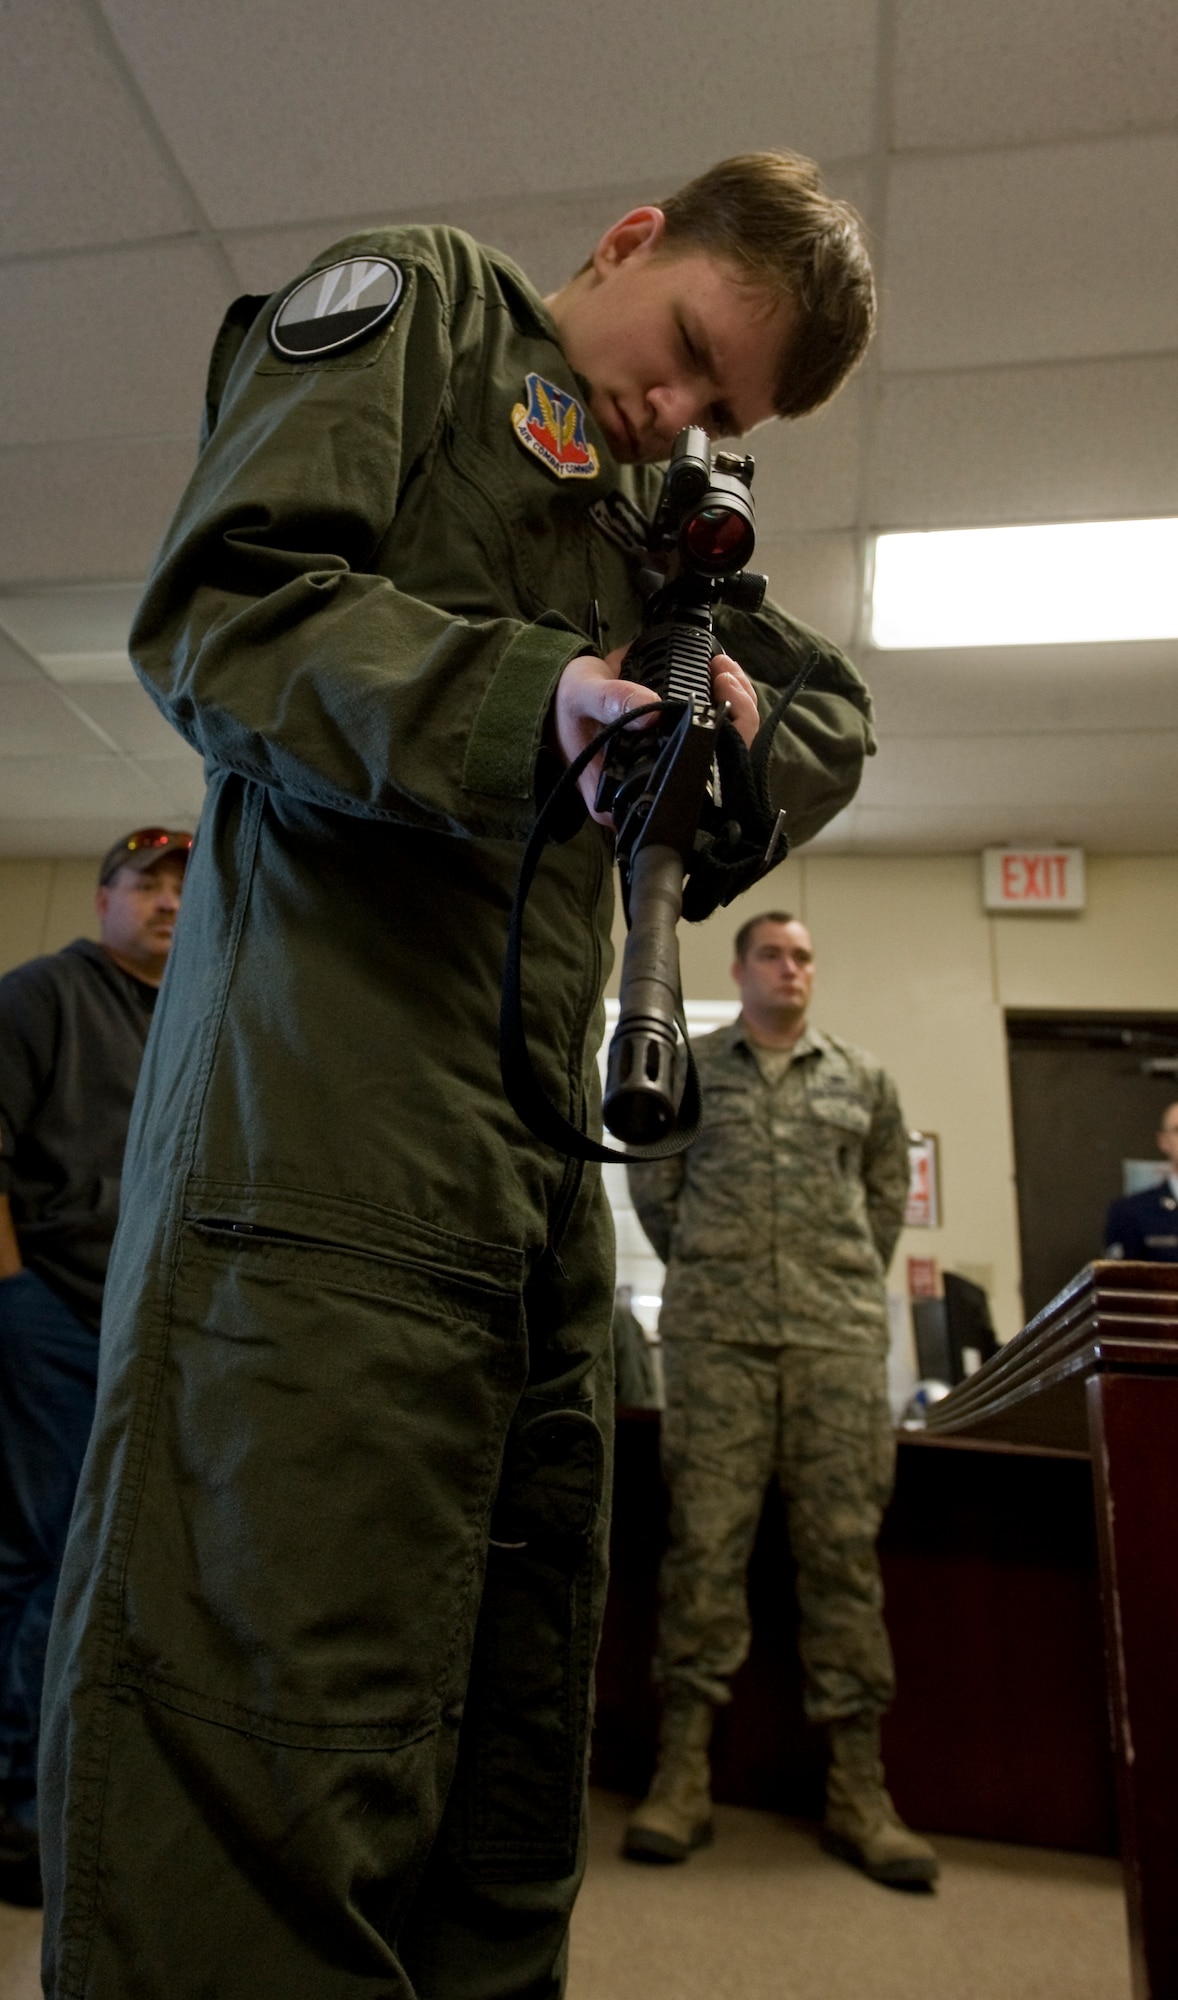 Keegan Vowell, 16-year-old Abilene resident, looks down the sights of an M-4 during a “Pilot for a Day” tour Jan. 14, 2013, at Dyess Air Force Base, Texas. Throughout the event, Keegan received his own flight suit, was demonstrated the capabilities of the 7th Security Forces K-9 Unit, toured the air traffic control tower, taxied a bomber, had his name put onto an aircraft, created his own Hollywood explosion with the 7th Civil Engineer Squadron Explosive Ordinance Disposal Unit and was presented a coin from the base commander. (U.S. Air Force photo by Airman 1st Class Jonathan Stefanko/ Released)